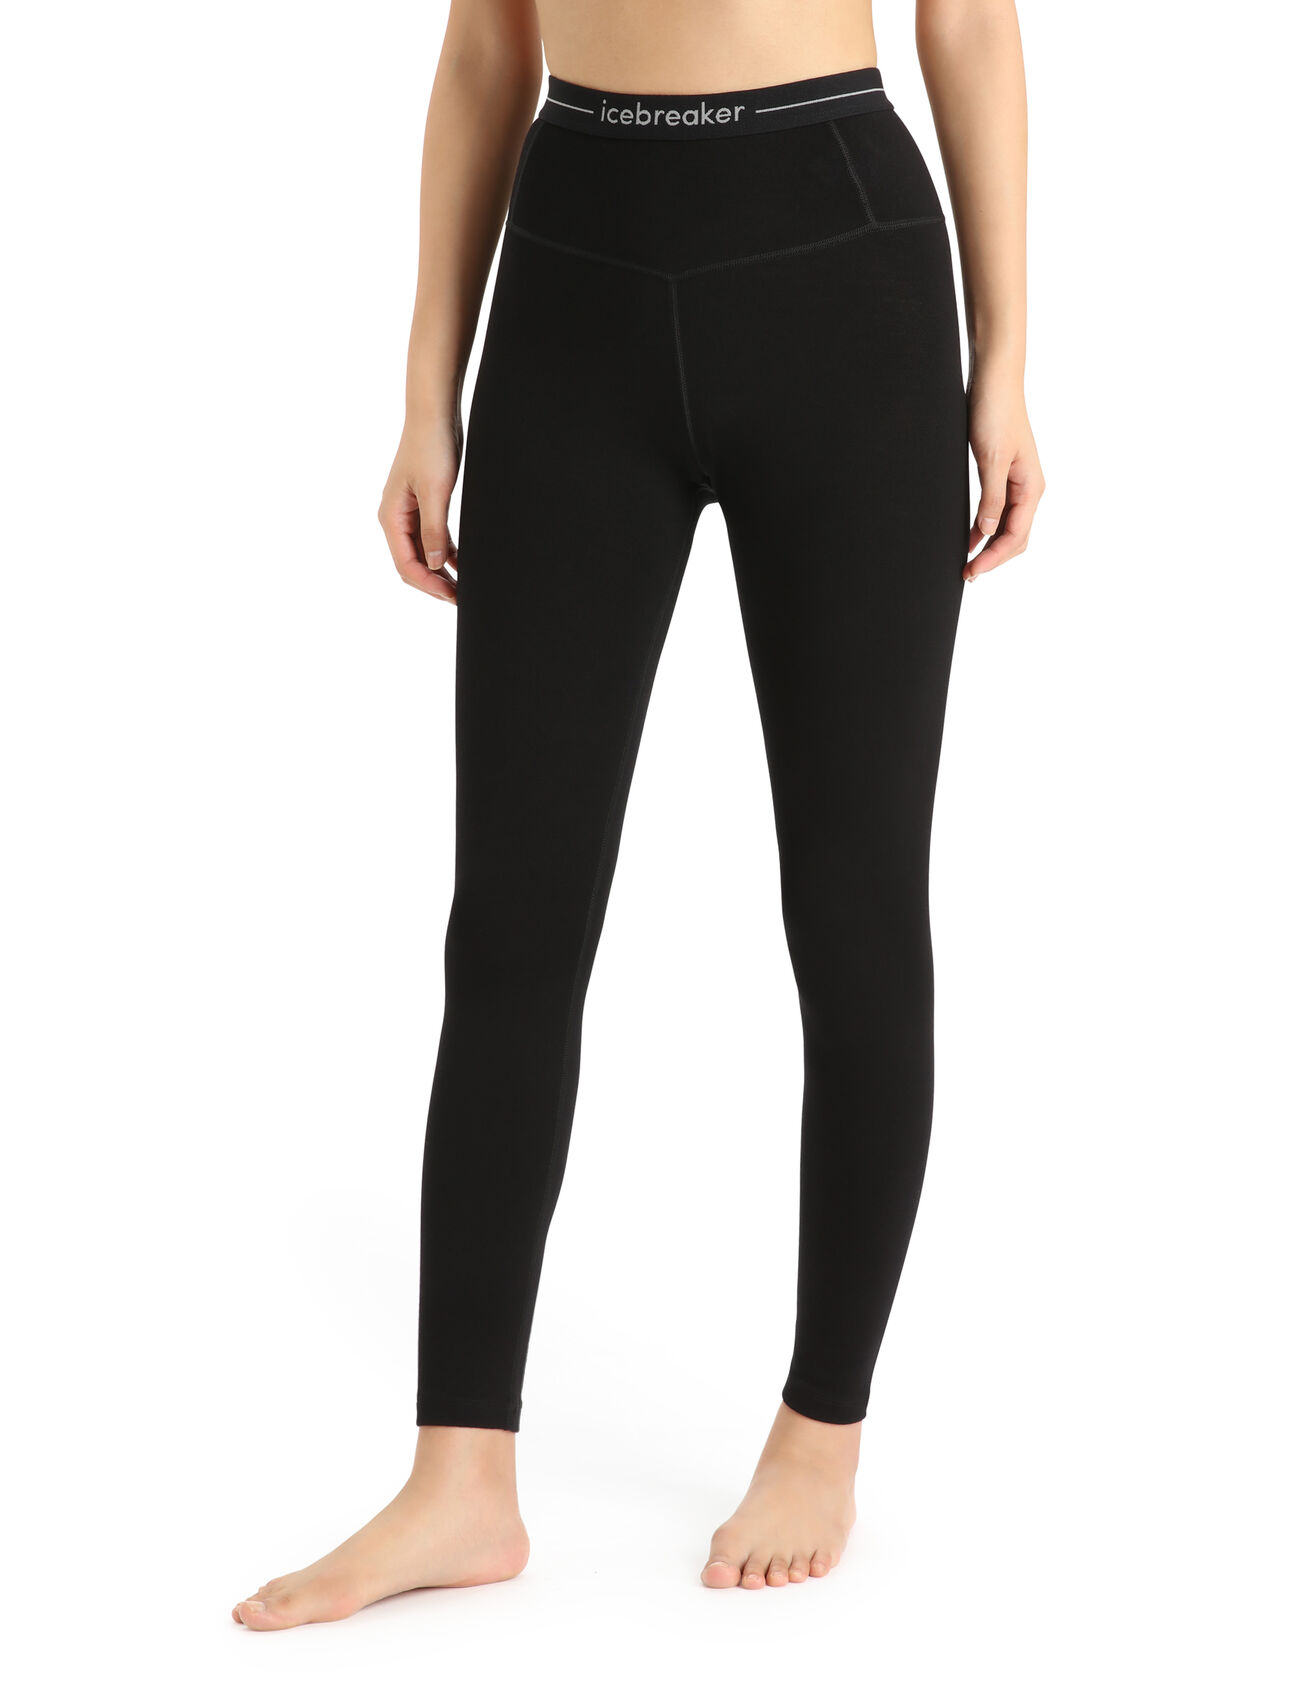 Womens Merino 260 Tech High Rise Leggings An incredibly warm merino base layer for the coldest months of the year, the 260 Tech High Rise Leggings are go-to piece for winter layering—ideal for skiing, snowshoeing and other cold-weather pursuits.